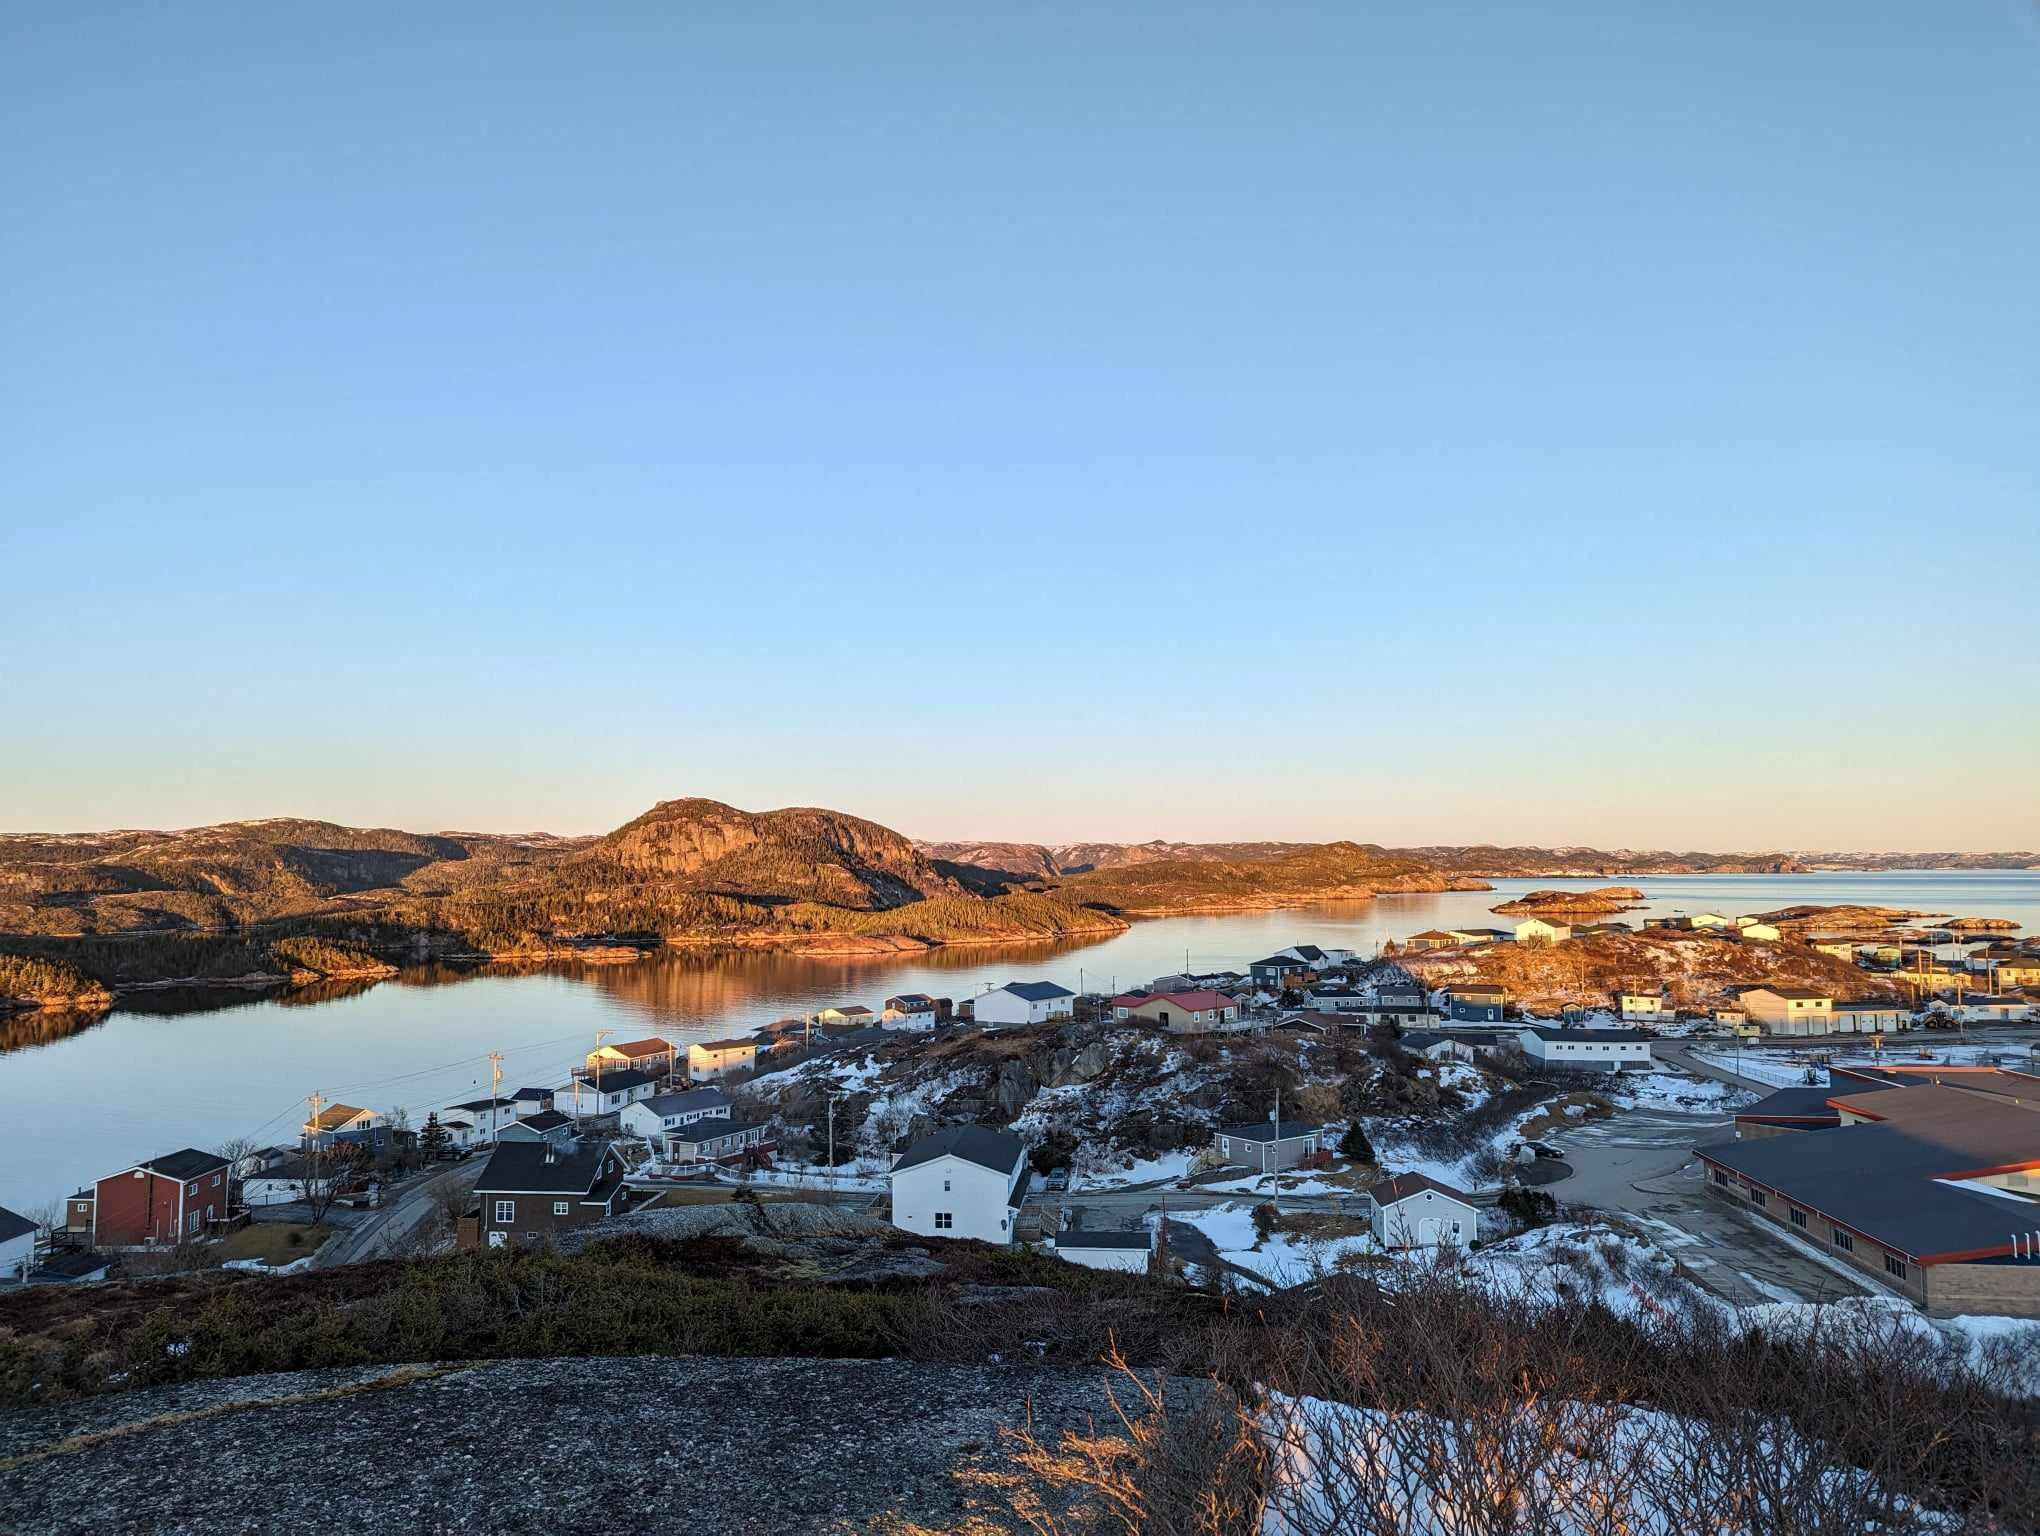 A view from the top of Maiden Tea Hill overlooks the seaside town of Burgeo and Eclipse Island